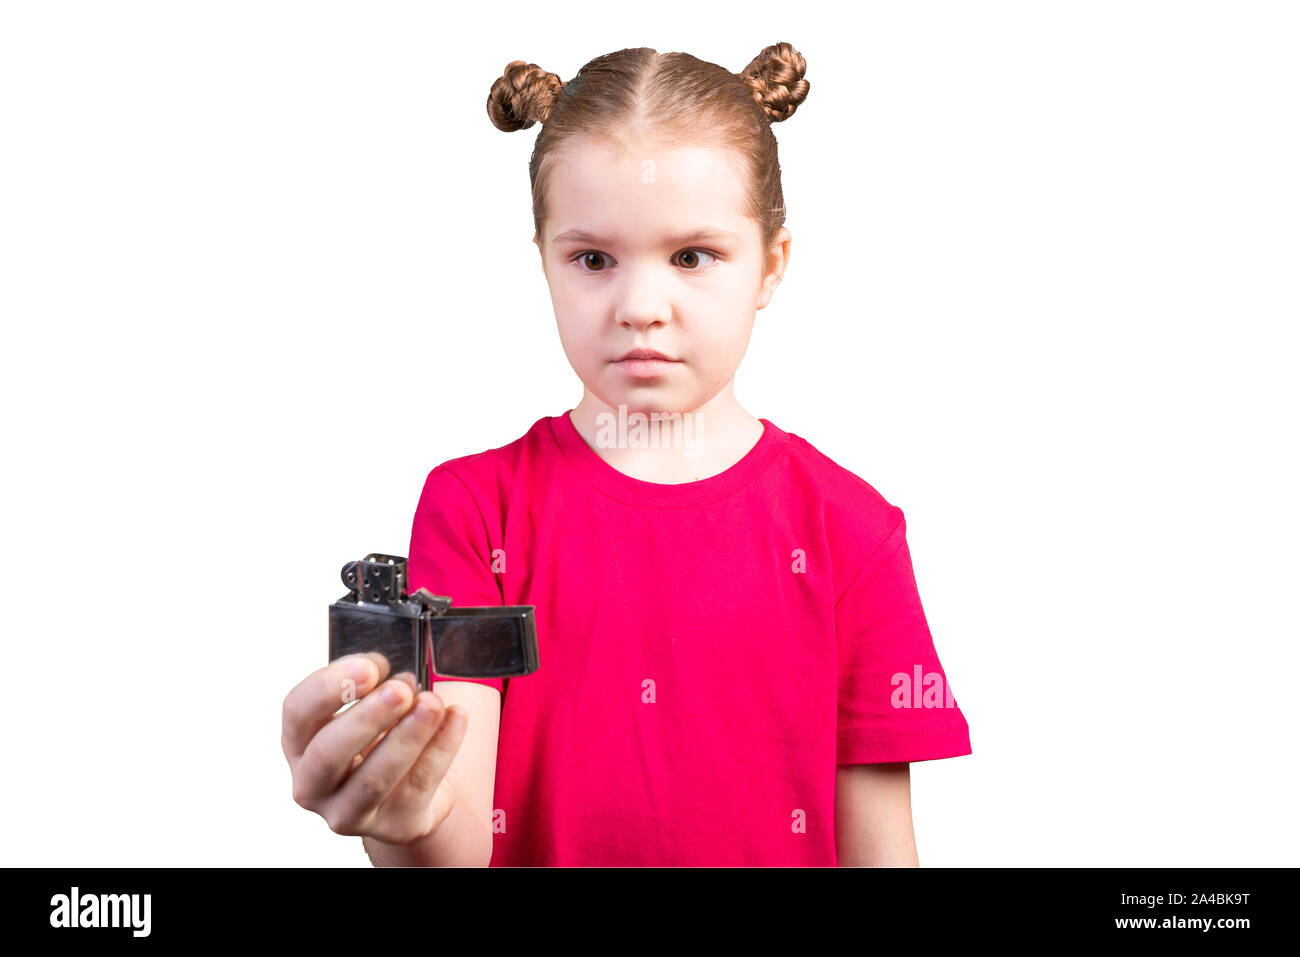 Girl playing with a lighter. Isolated on a white background. Stock Photo